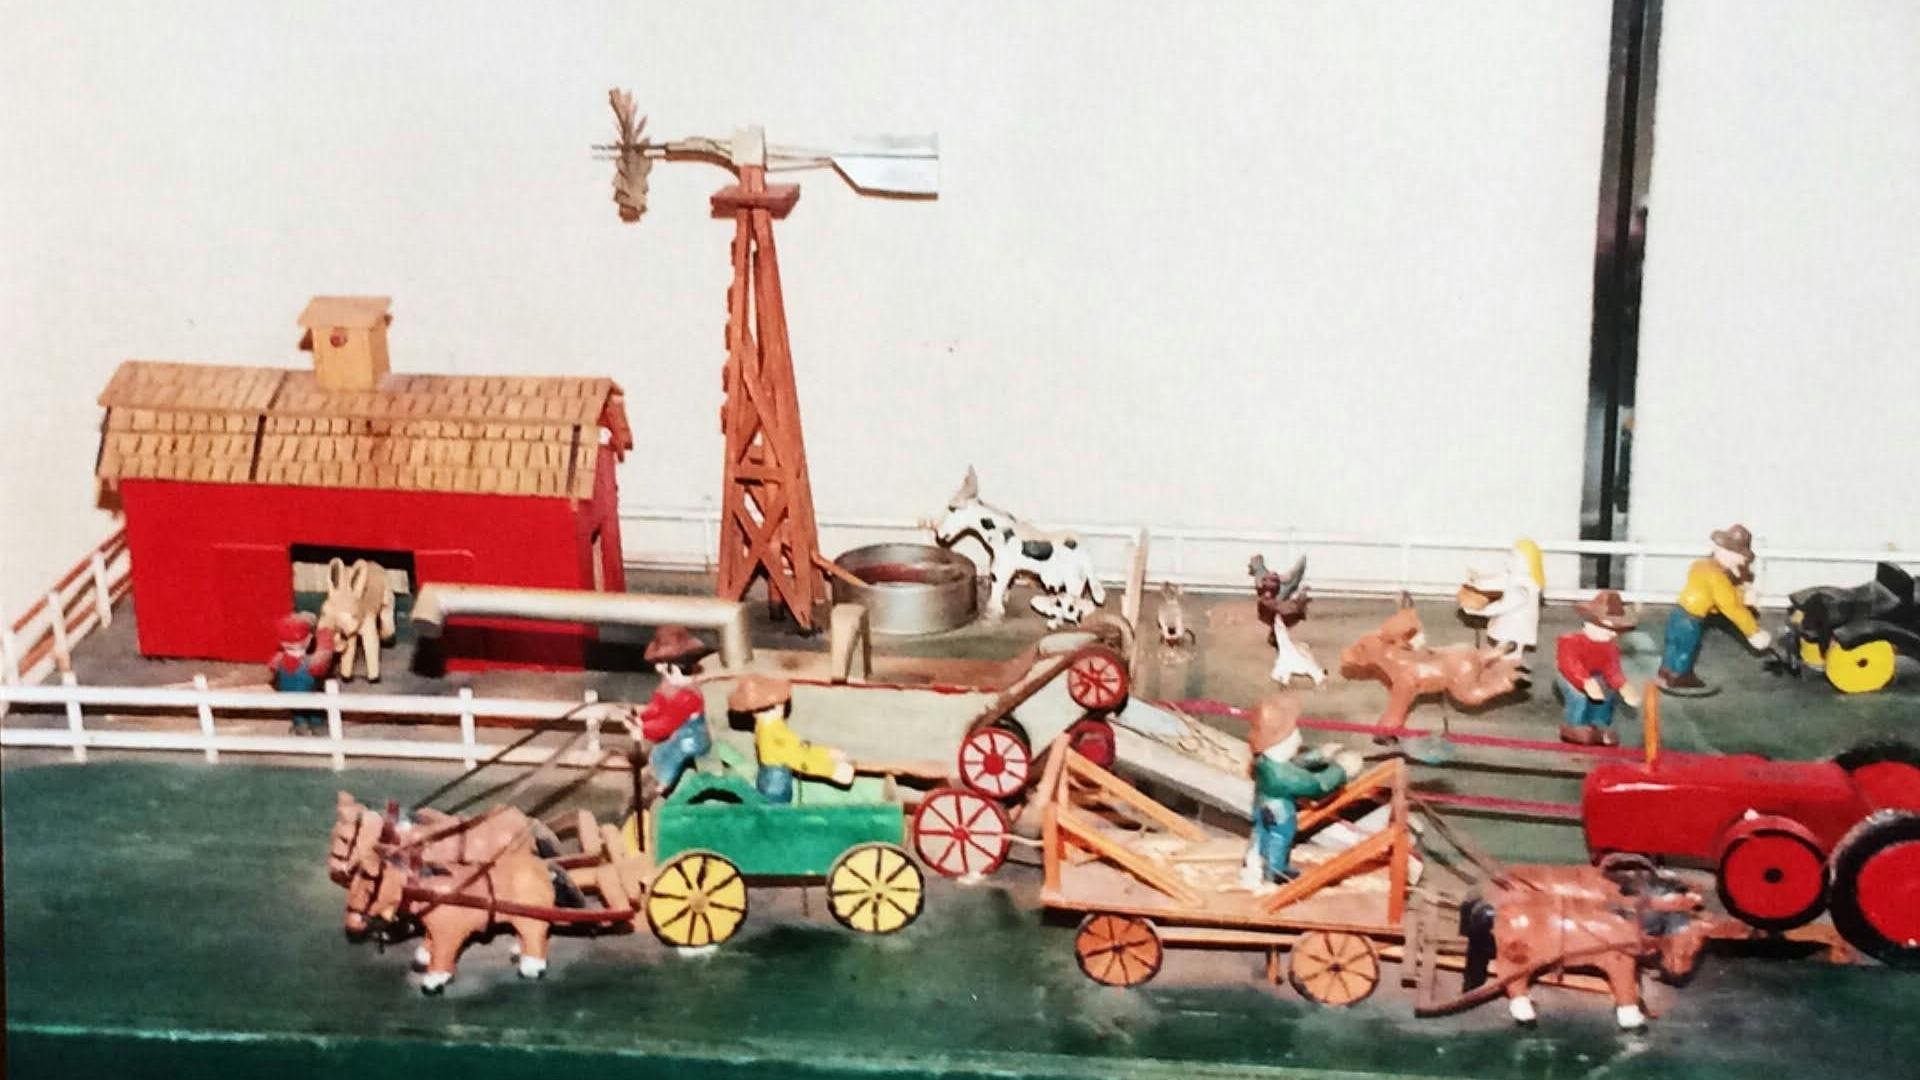 A photograph of a miniature farm including a farmhouse in bright red, cows, horses, farmers, and carriages. The scene depicted shows the miniature farmers doing different tasks around the farm. The objects are reminiscent of children’s toys.